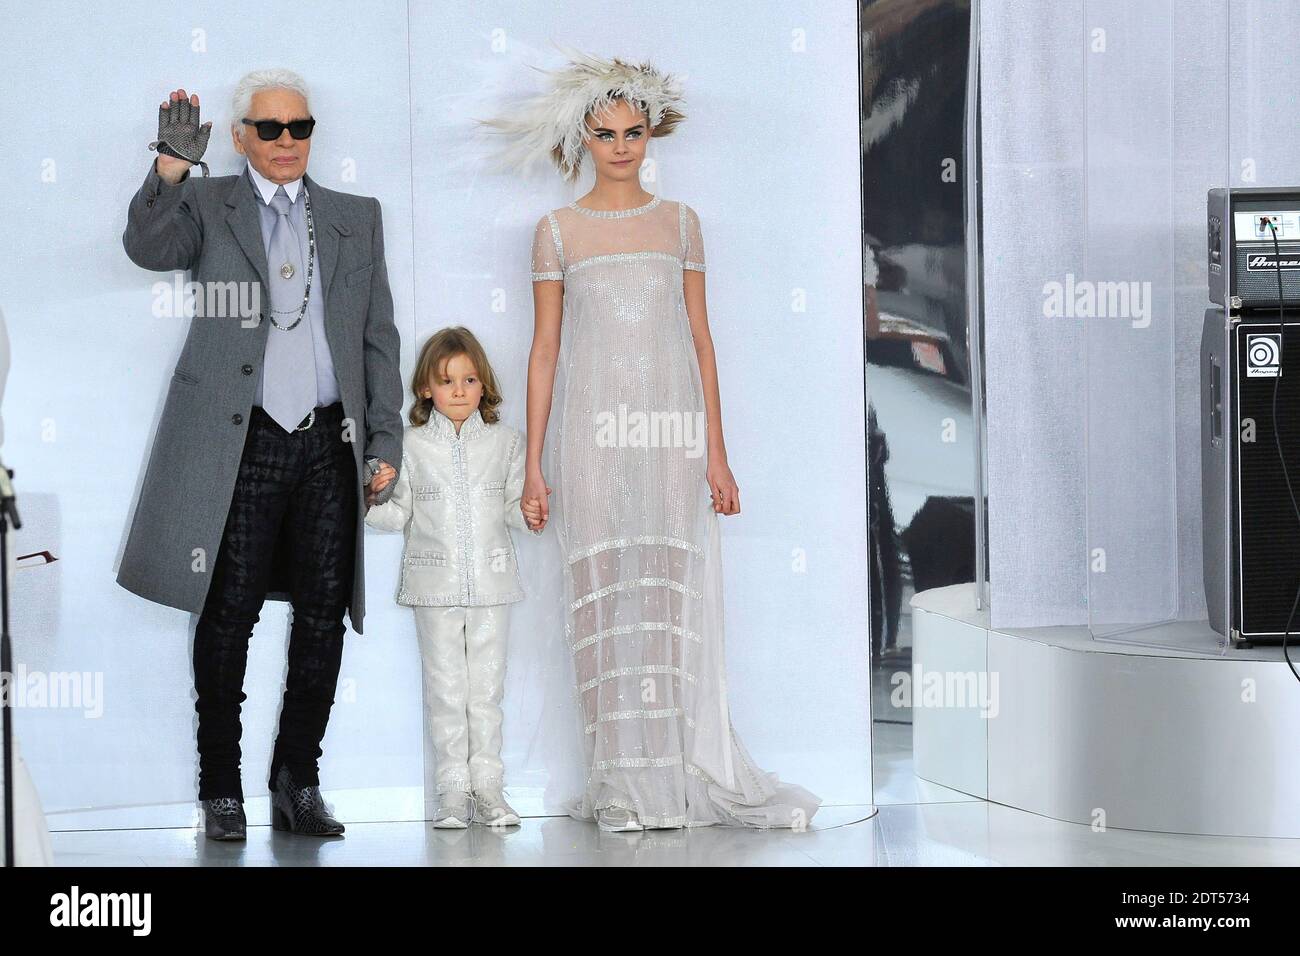 Paris, France. 4th Mar, 2014. German designer Karl Lagerfeld and british  model Cara Delevingne present the Chanel fall/winter 2014 /2015 collection  during the Paris Pret a porter fashion week in the set